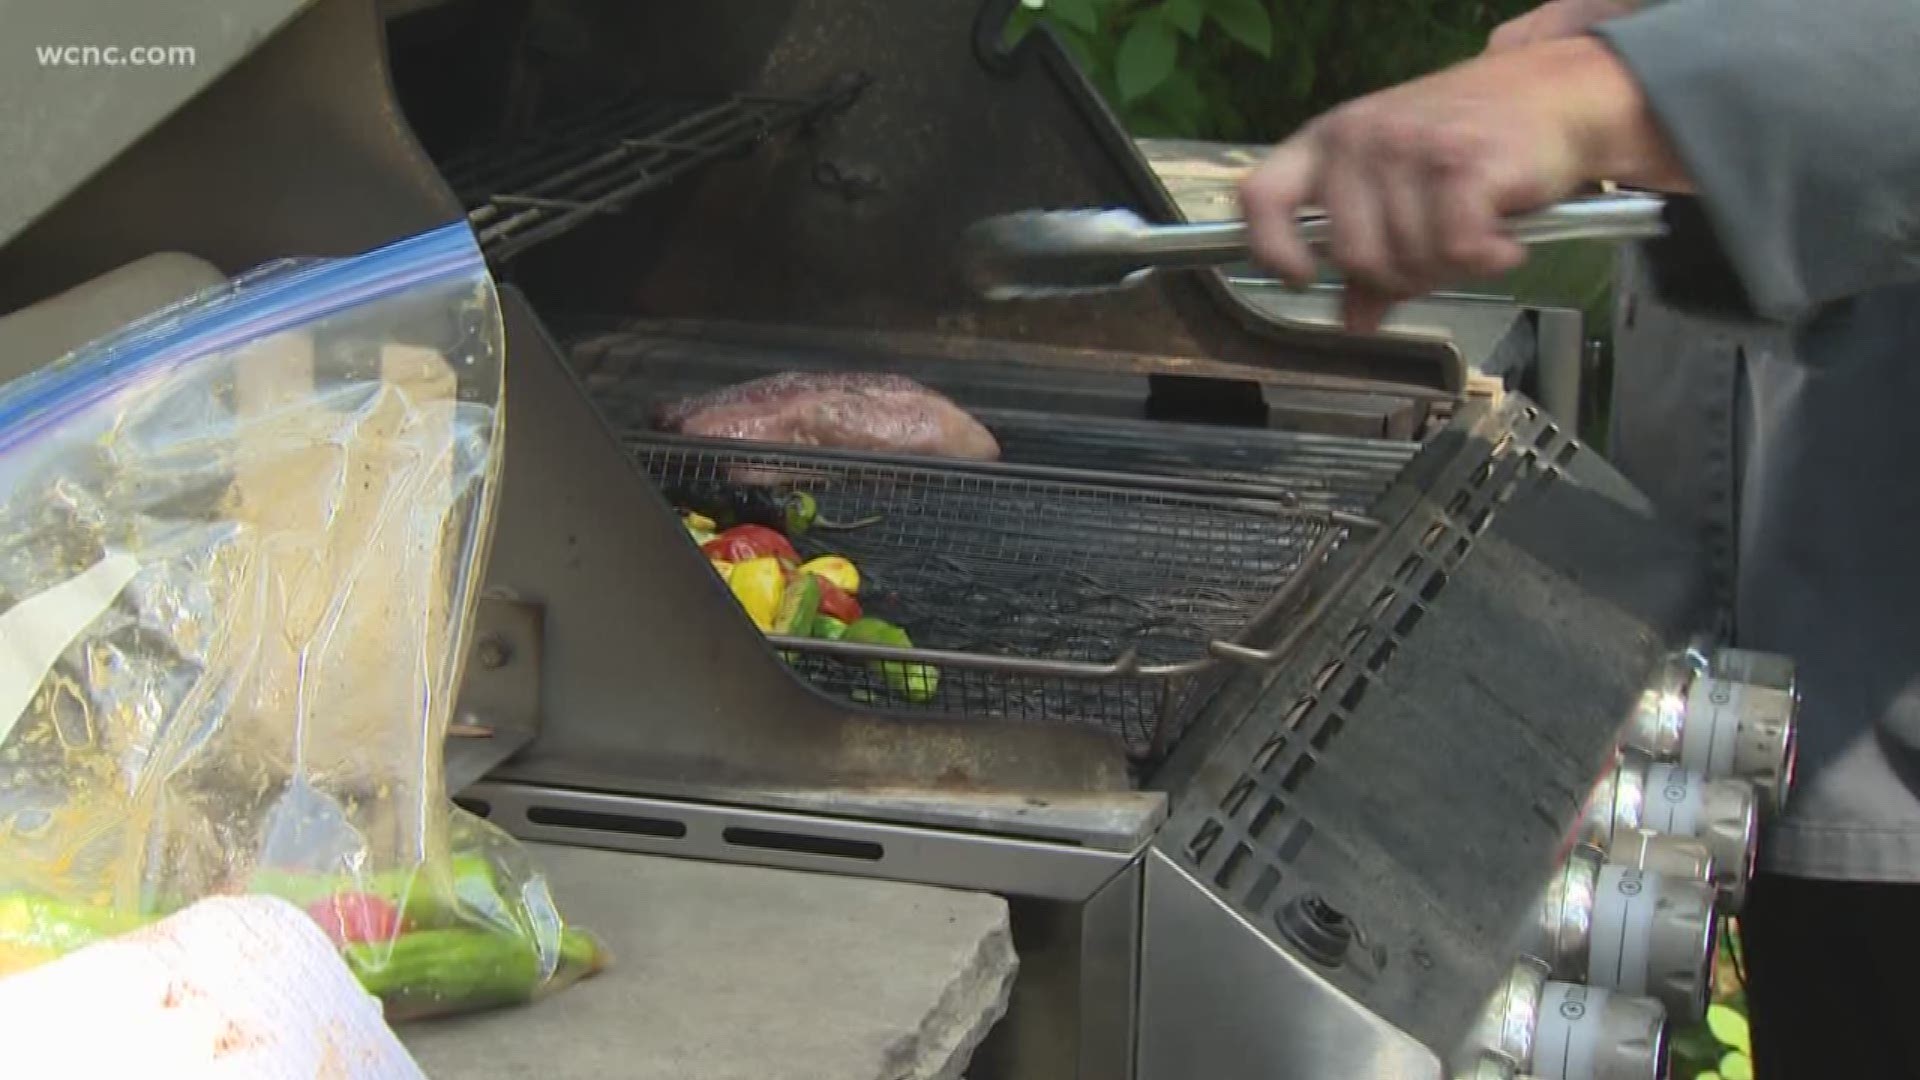 Chef Gene Briggs of Legion Brewing shares a delicious steak recipe and easy grilling tips for National Grilling Month!